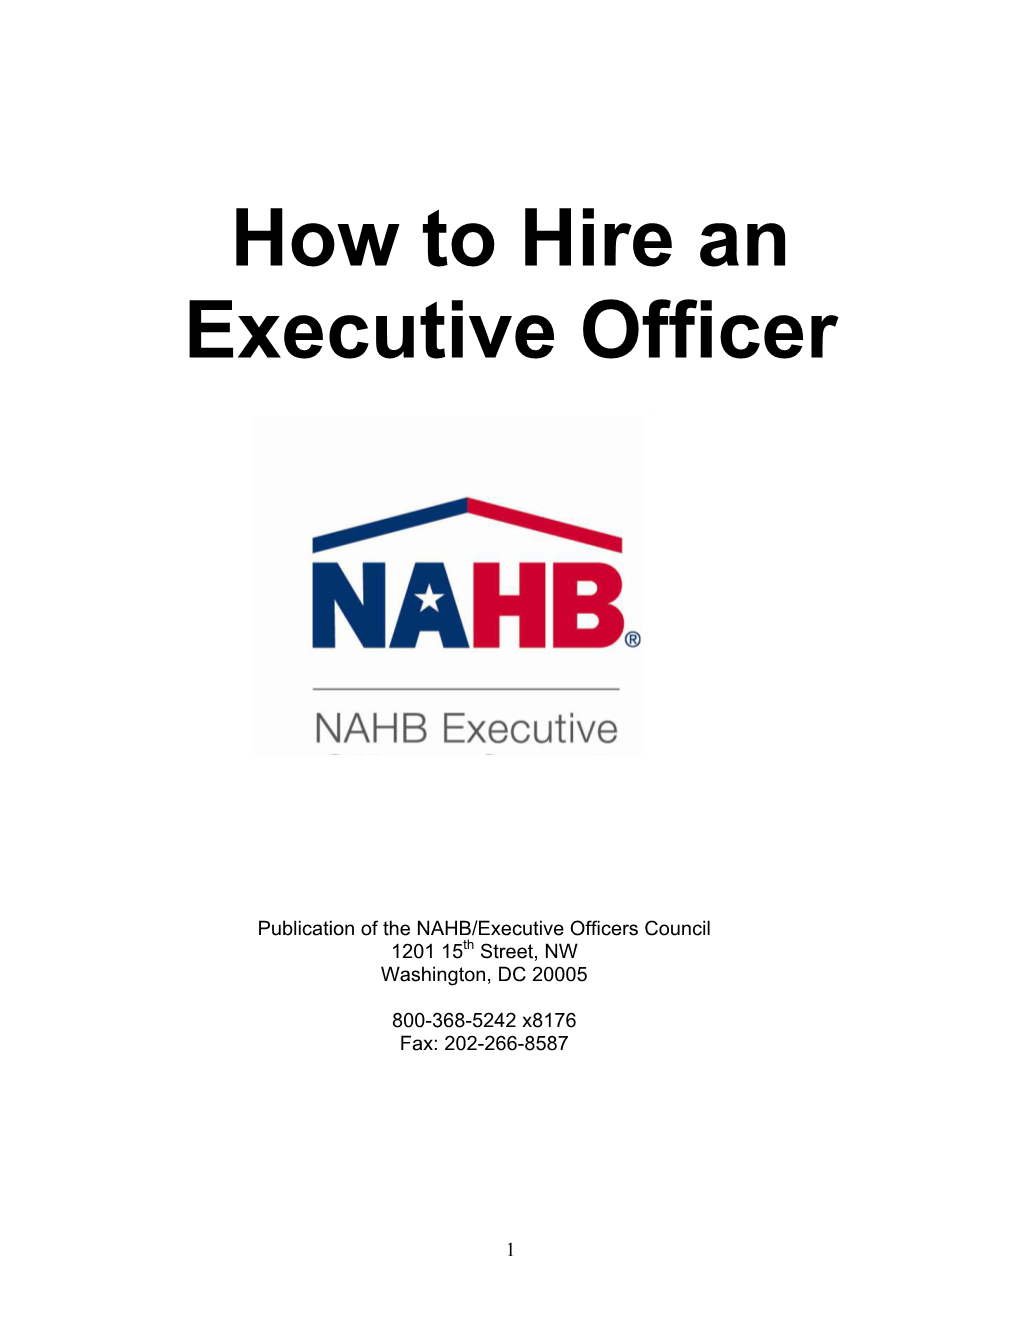 How to Hire an Executive Officer